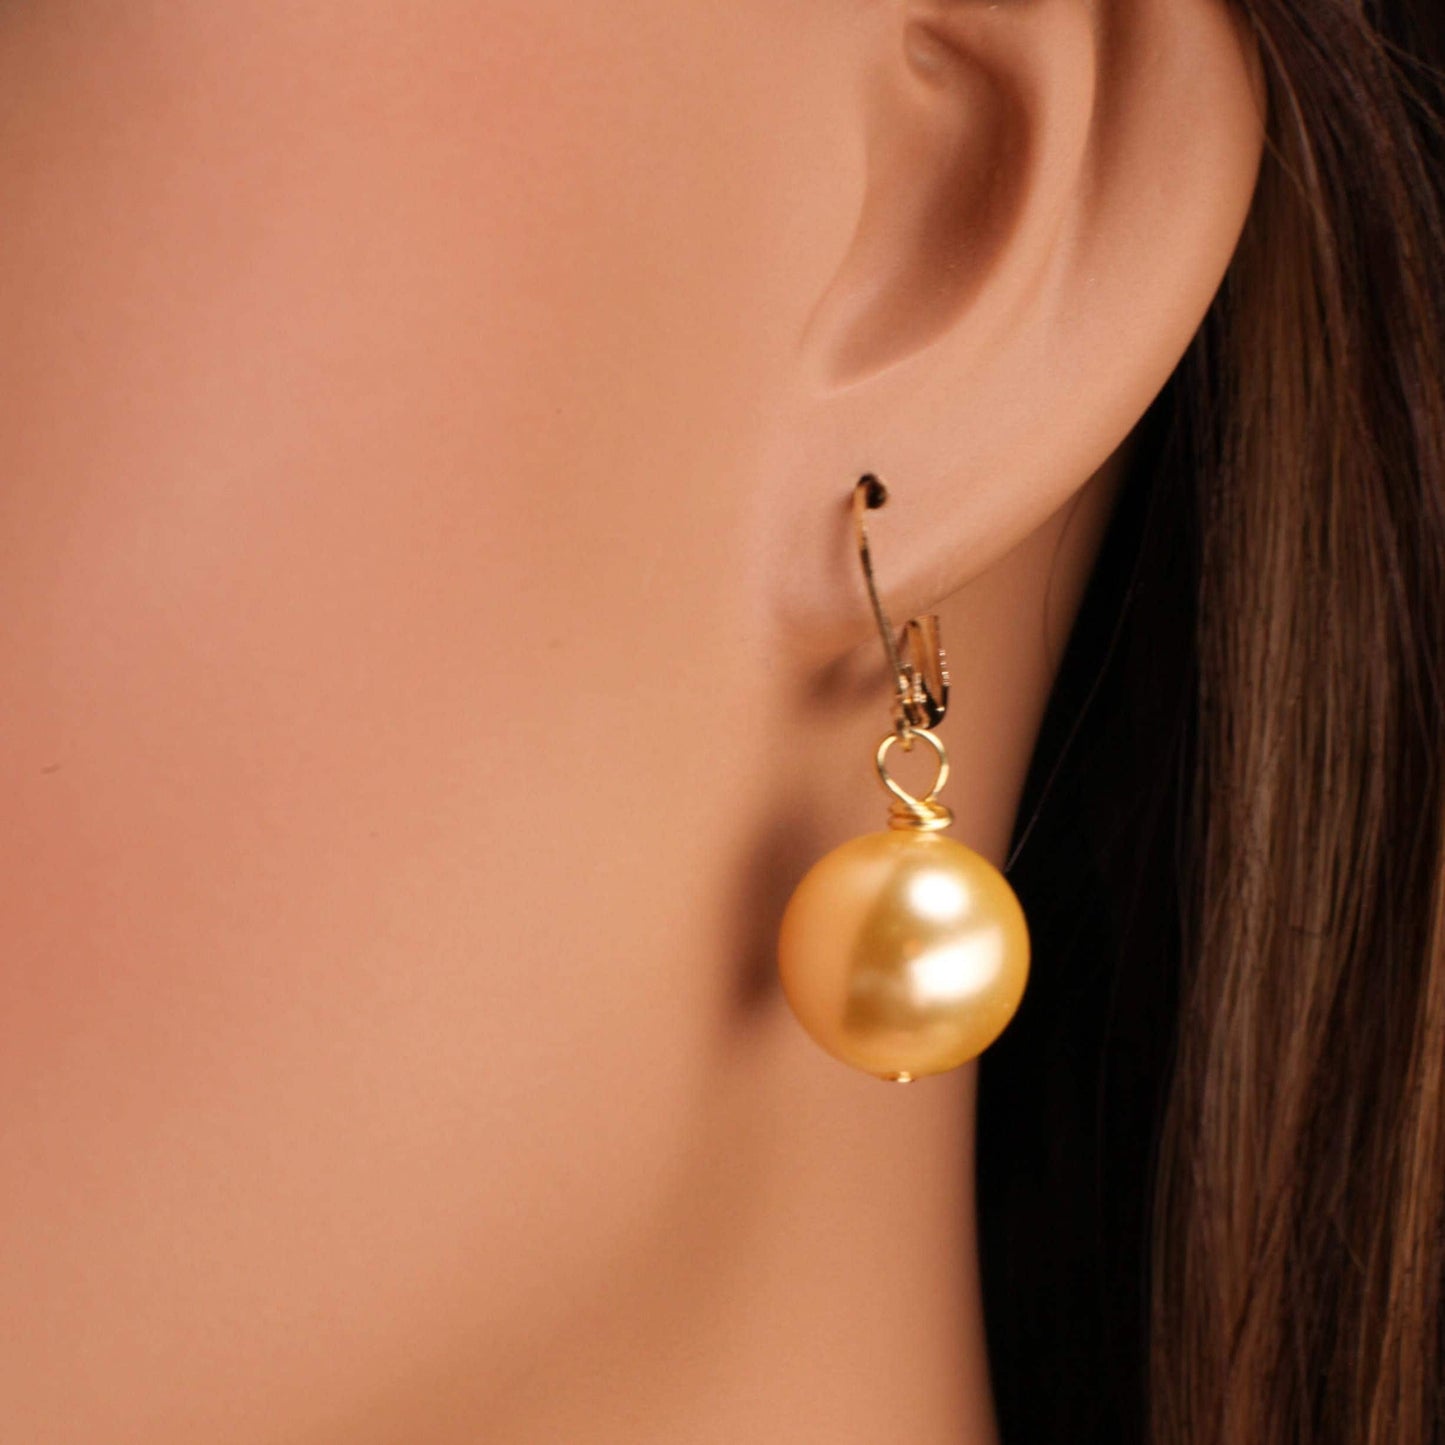 Golden Yellow South Sea Shell Pearl 14, 16mm Large High Luster in Gold Plated or 14k Gold Filled Leverback Earrings, Bridal, Gift for Her